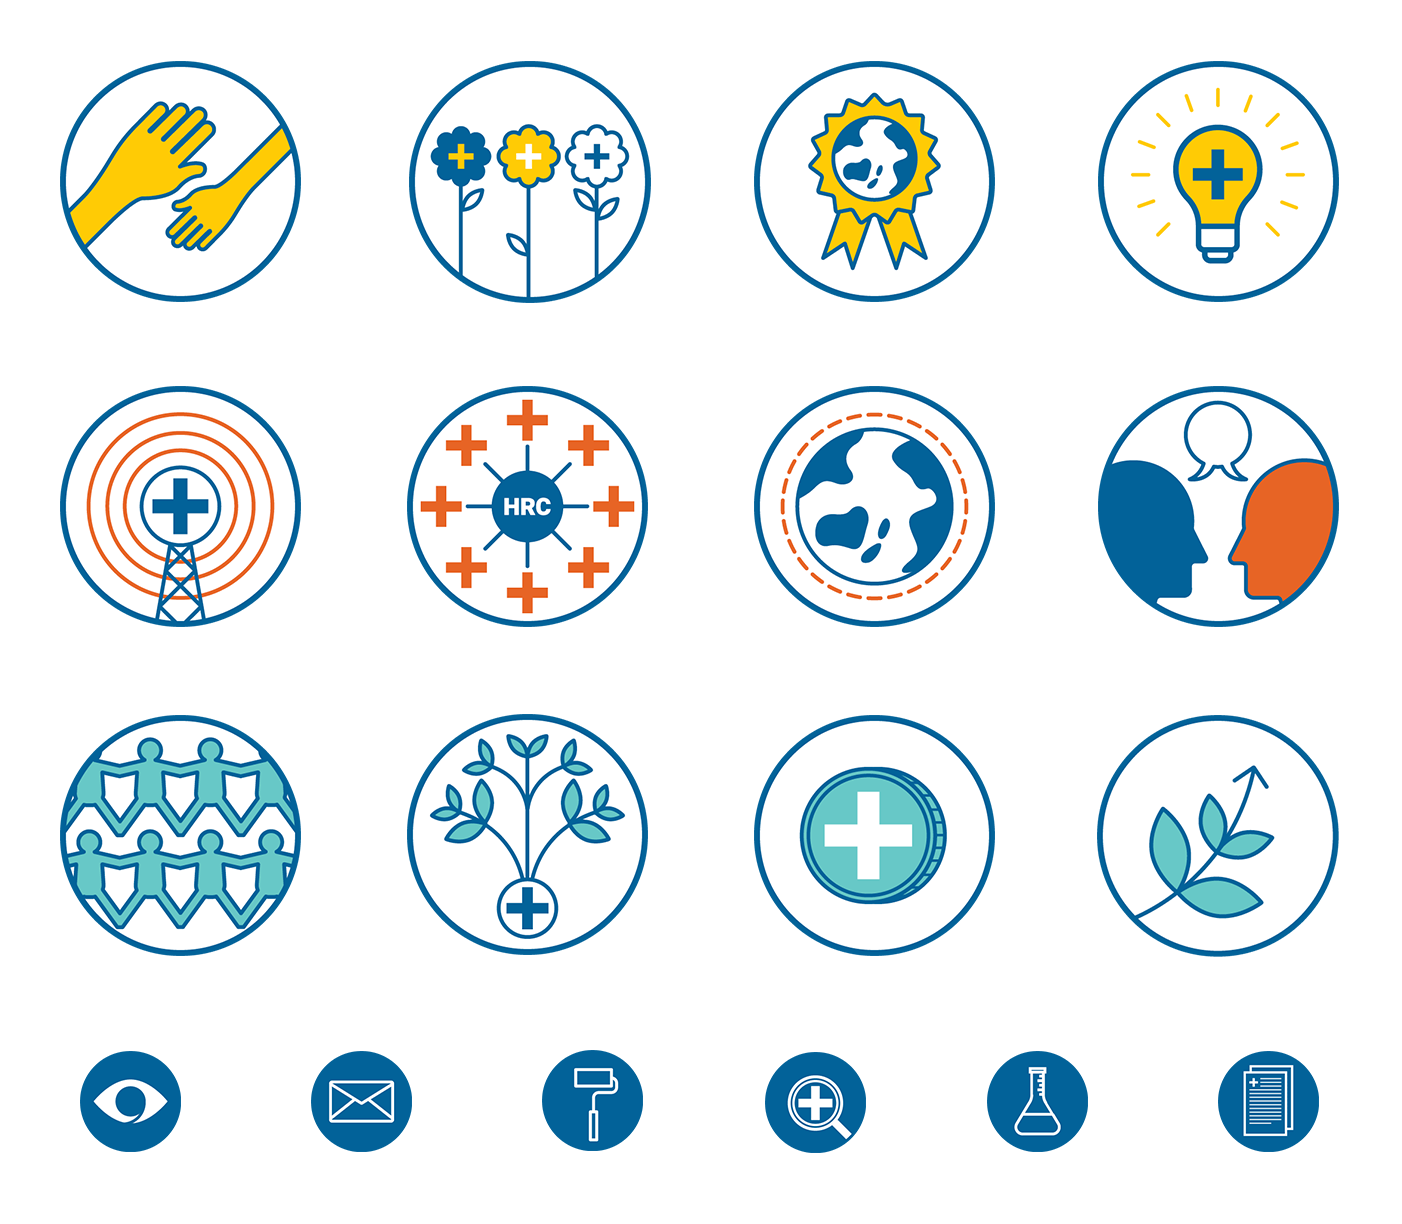 Icon set developed for the report